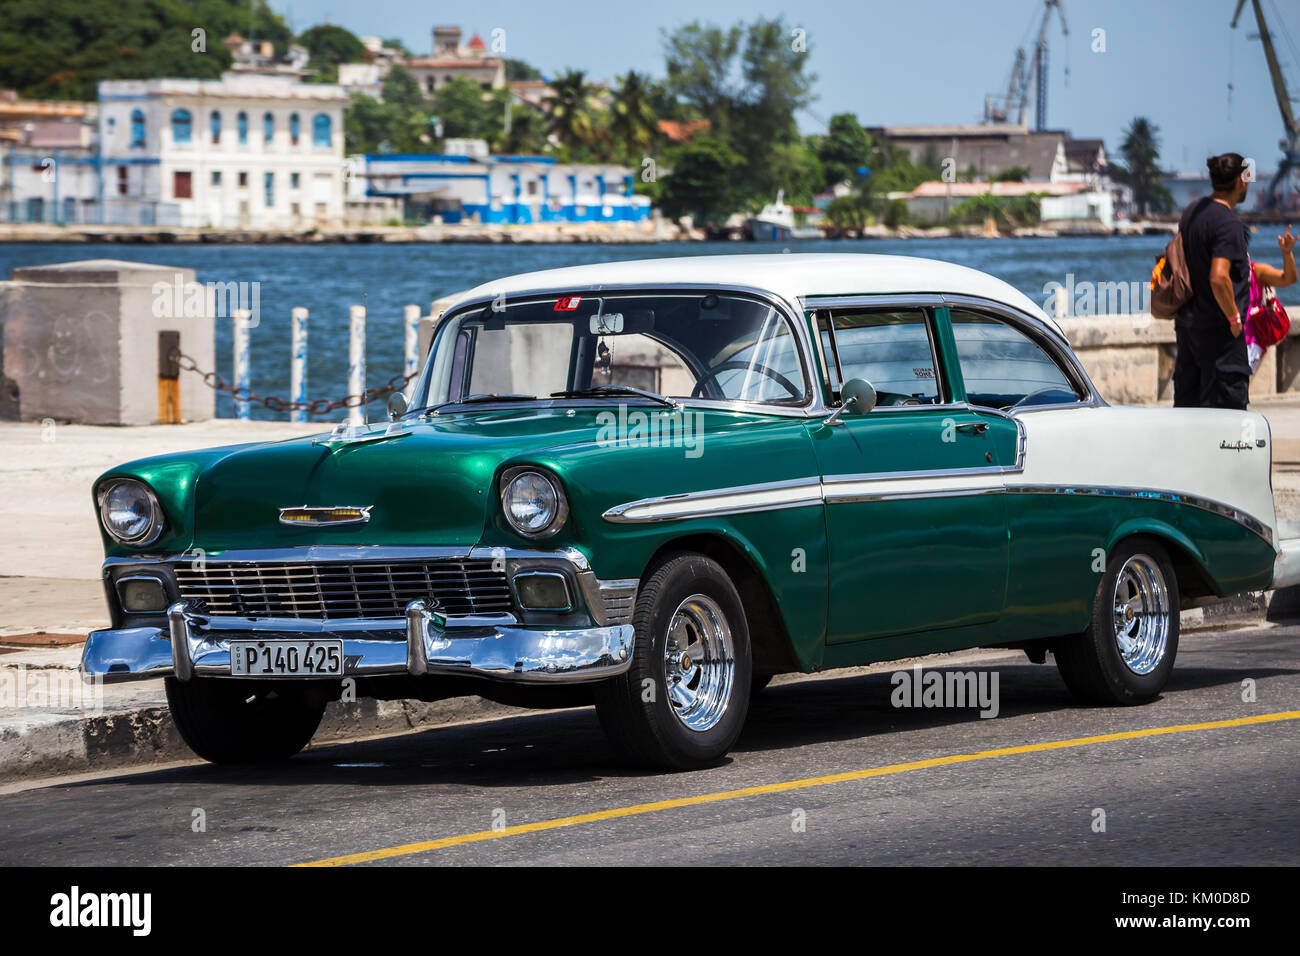 An old American car in prestine condition sits on the side of the road one afternoon in Havana.  The industrial side of the city and harbour can be se Stock Photo